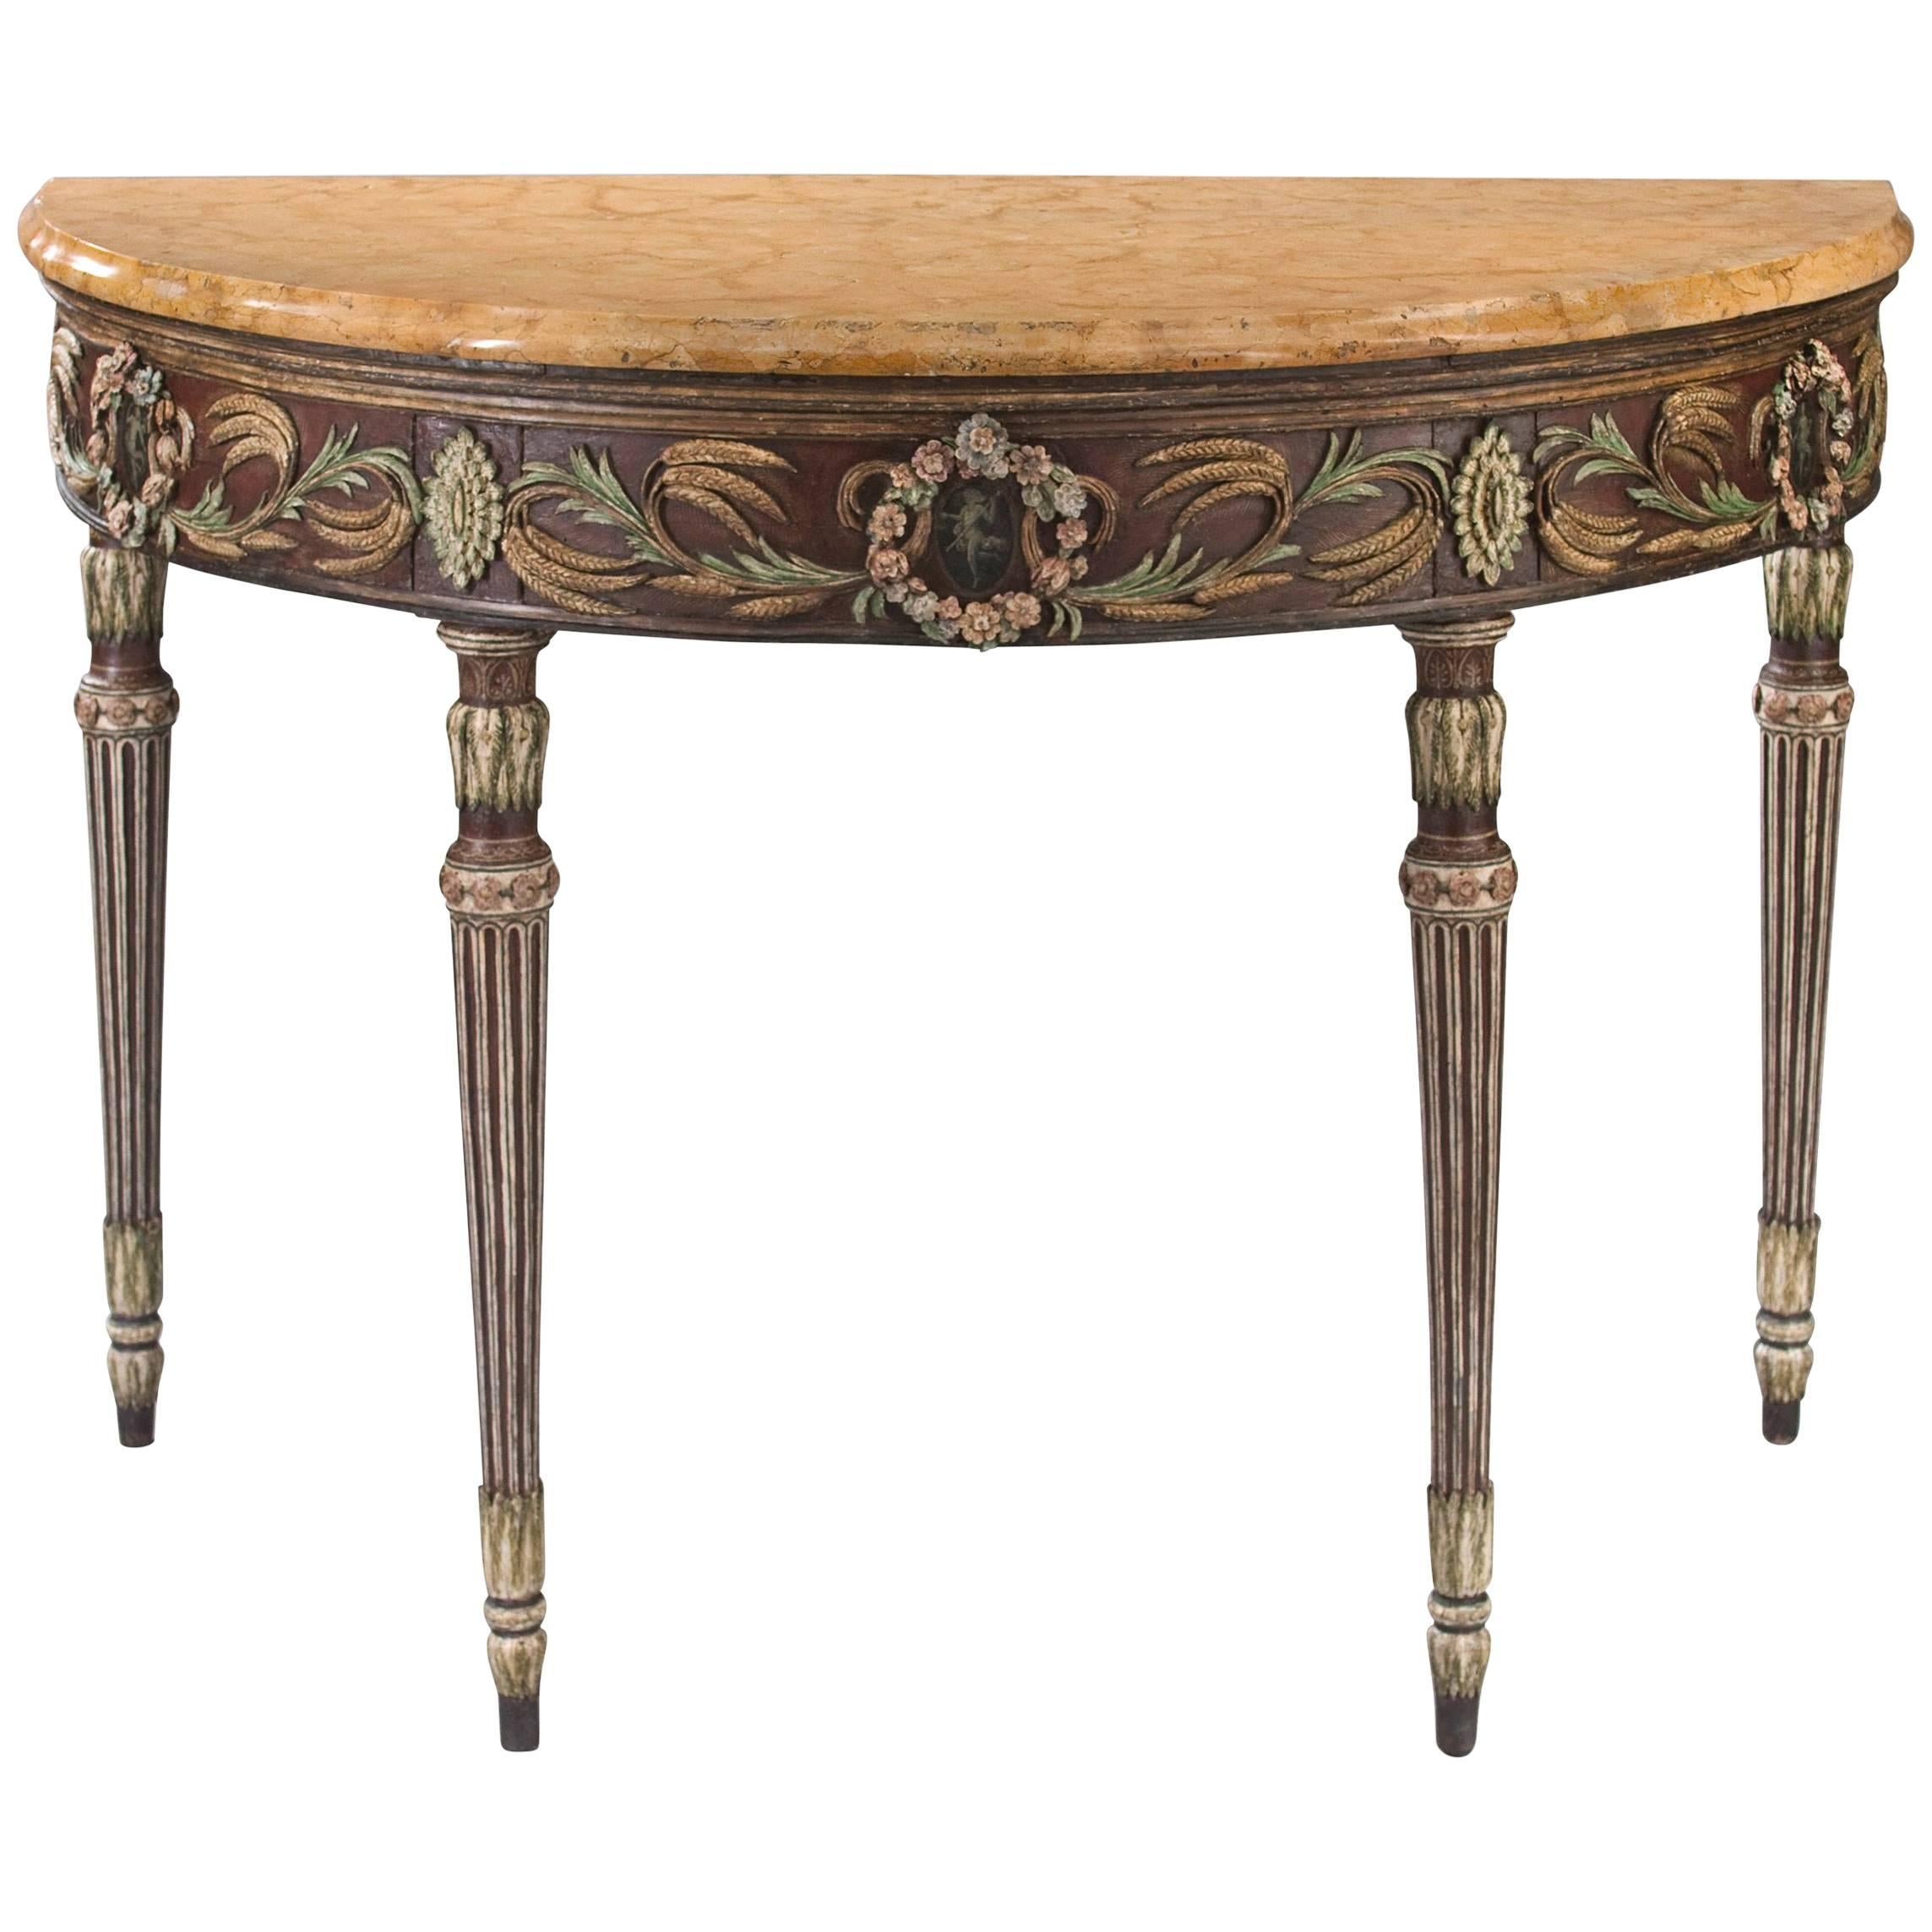 Venetian Neoclassical Demilune Console Table with a Giallo Sienna Marble Top